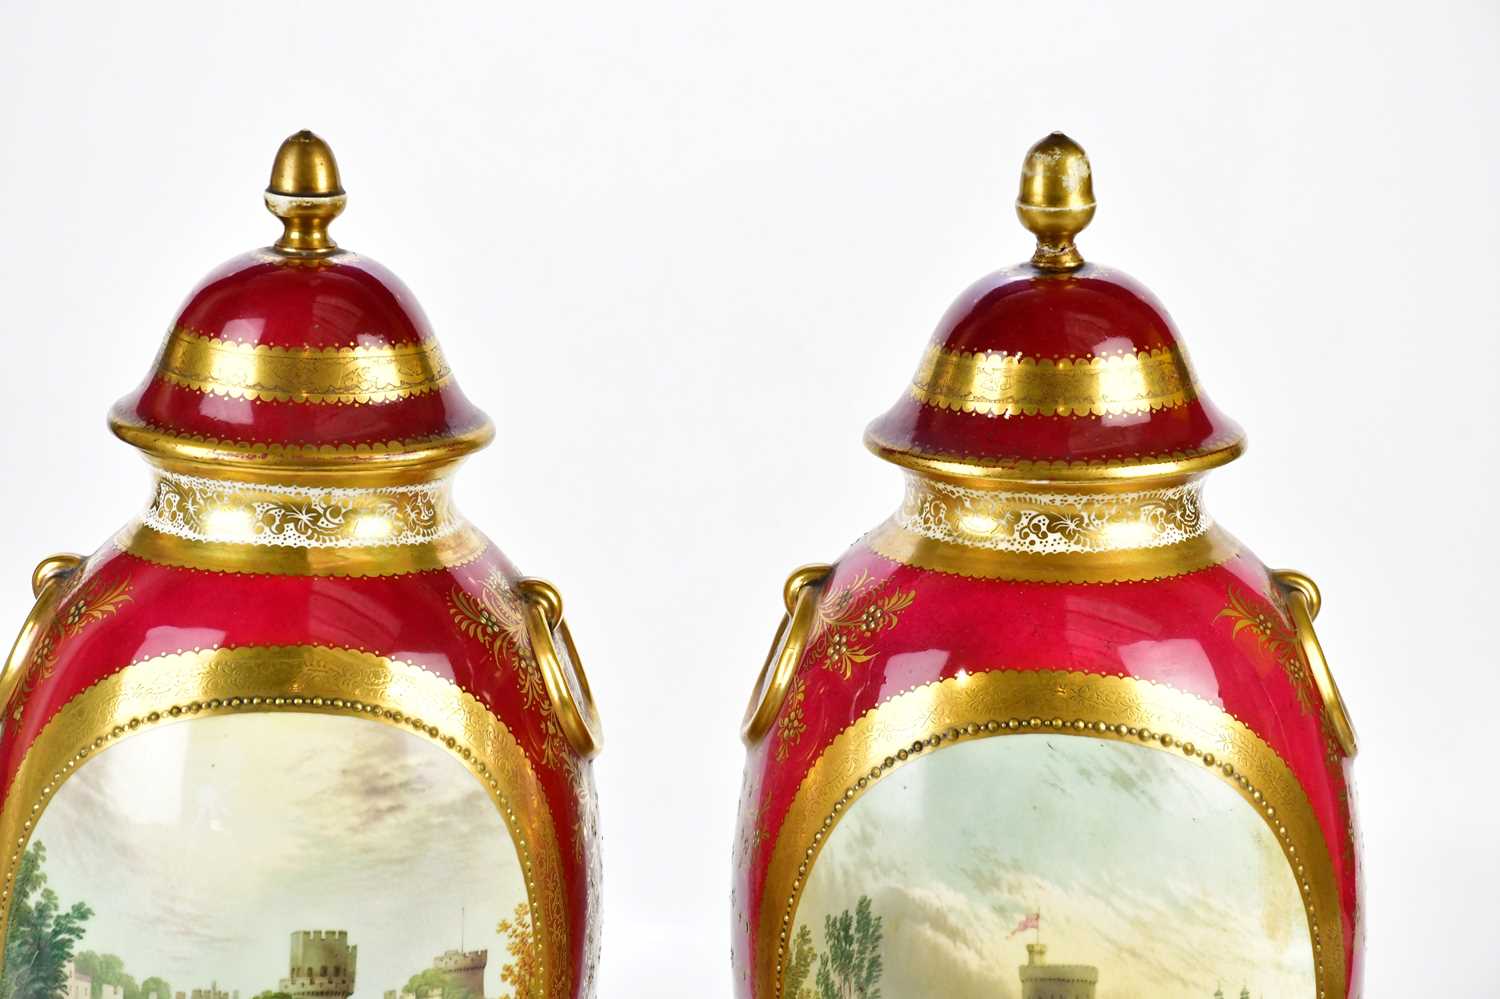 A pair of 19th century Staffordshire ovoid vases and covers, hand painted with scenes of Windsor - Image 2 of 6